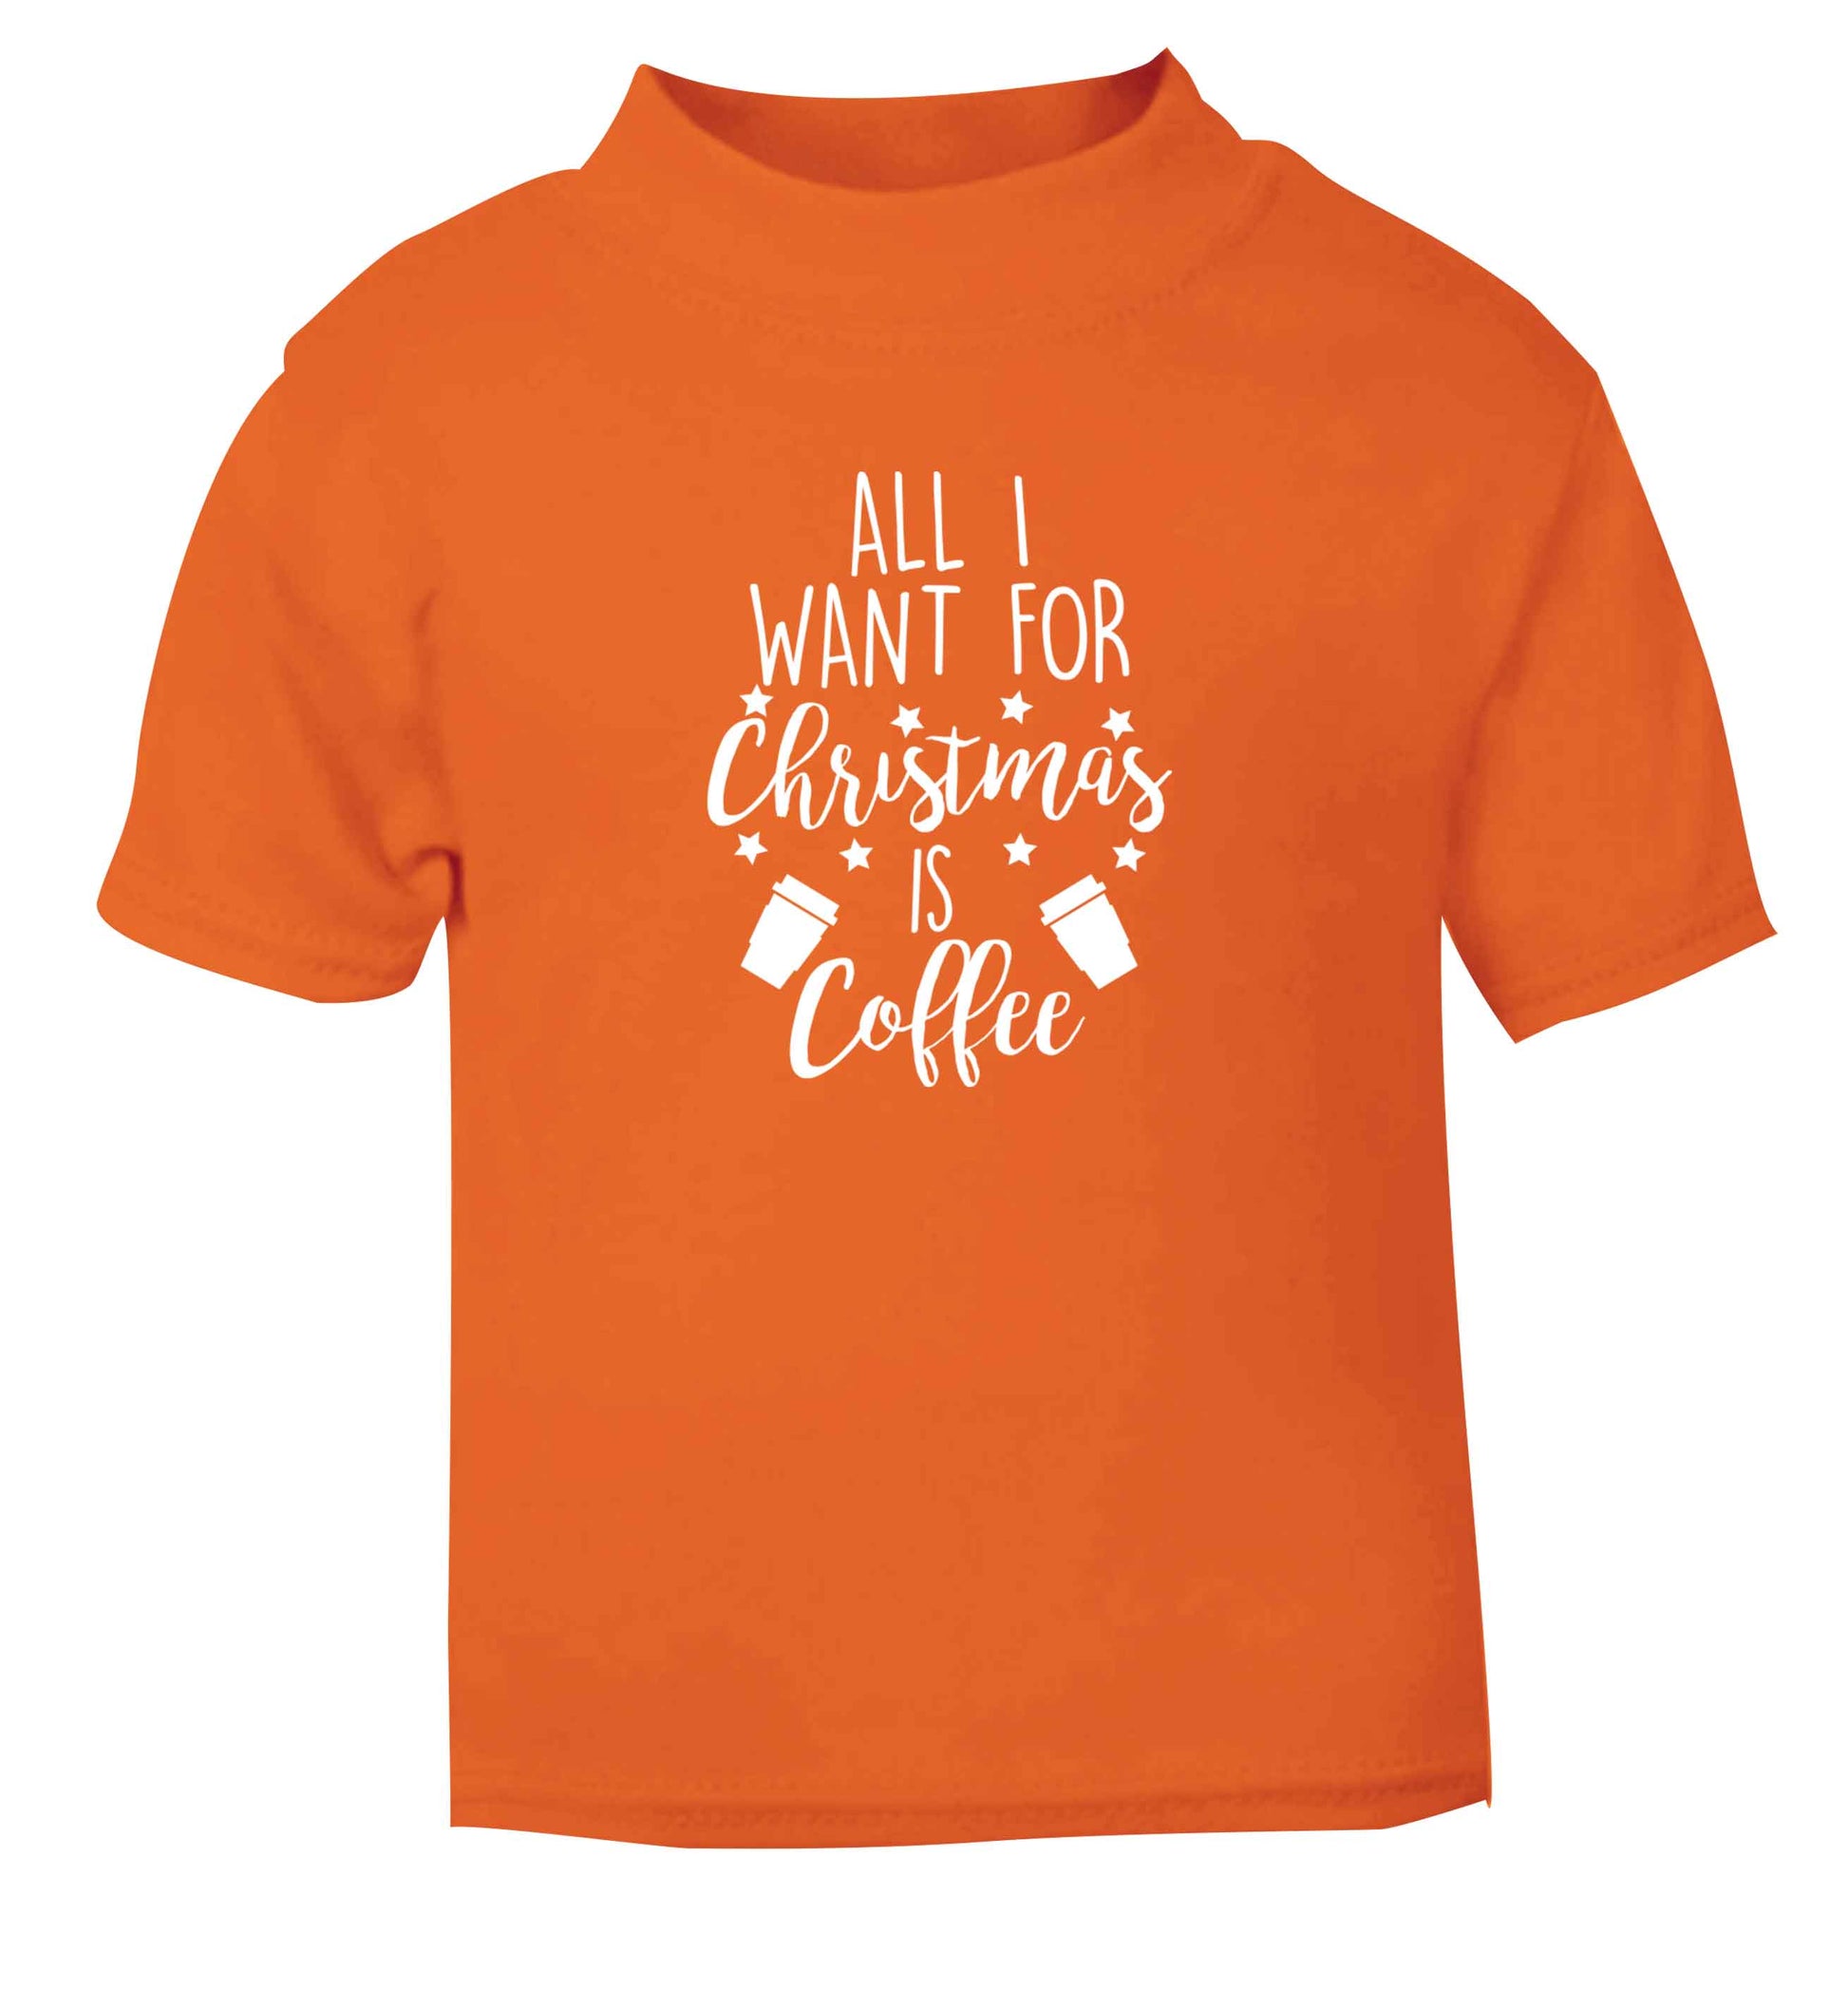 All I want for Christmas is coffee orange Baby Toddler Tshirt 2 Years